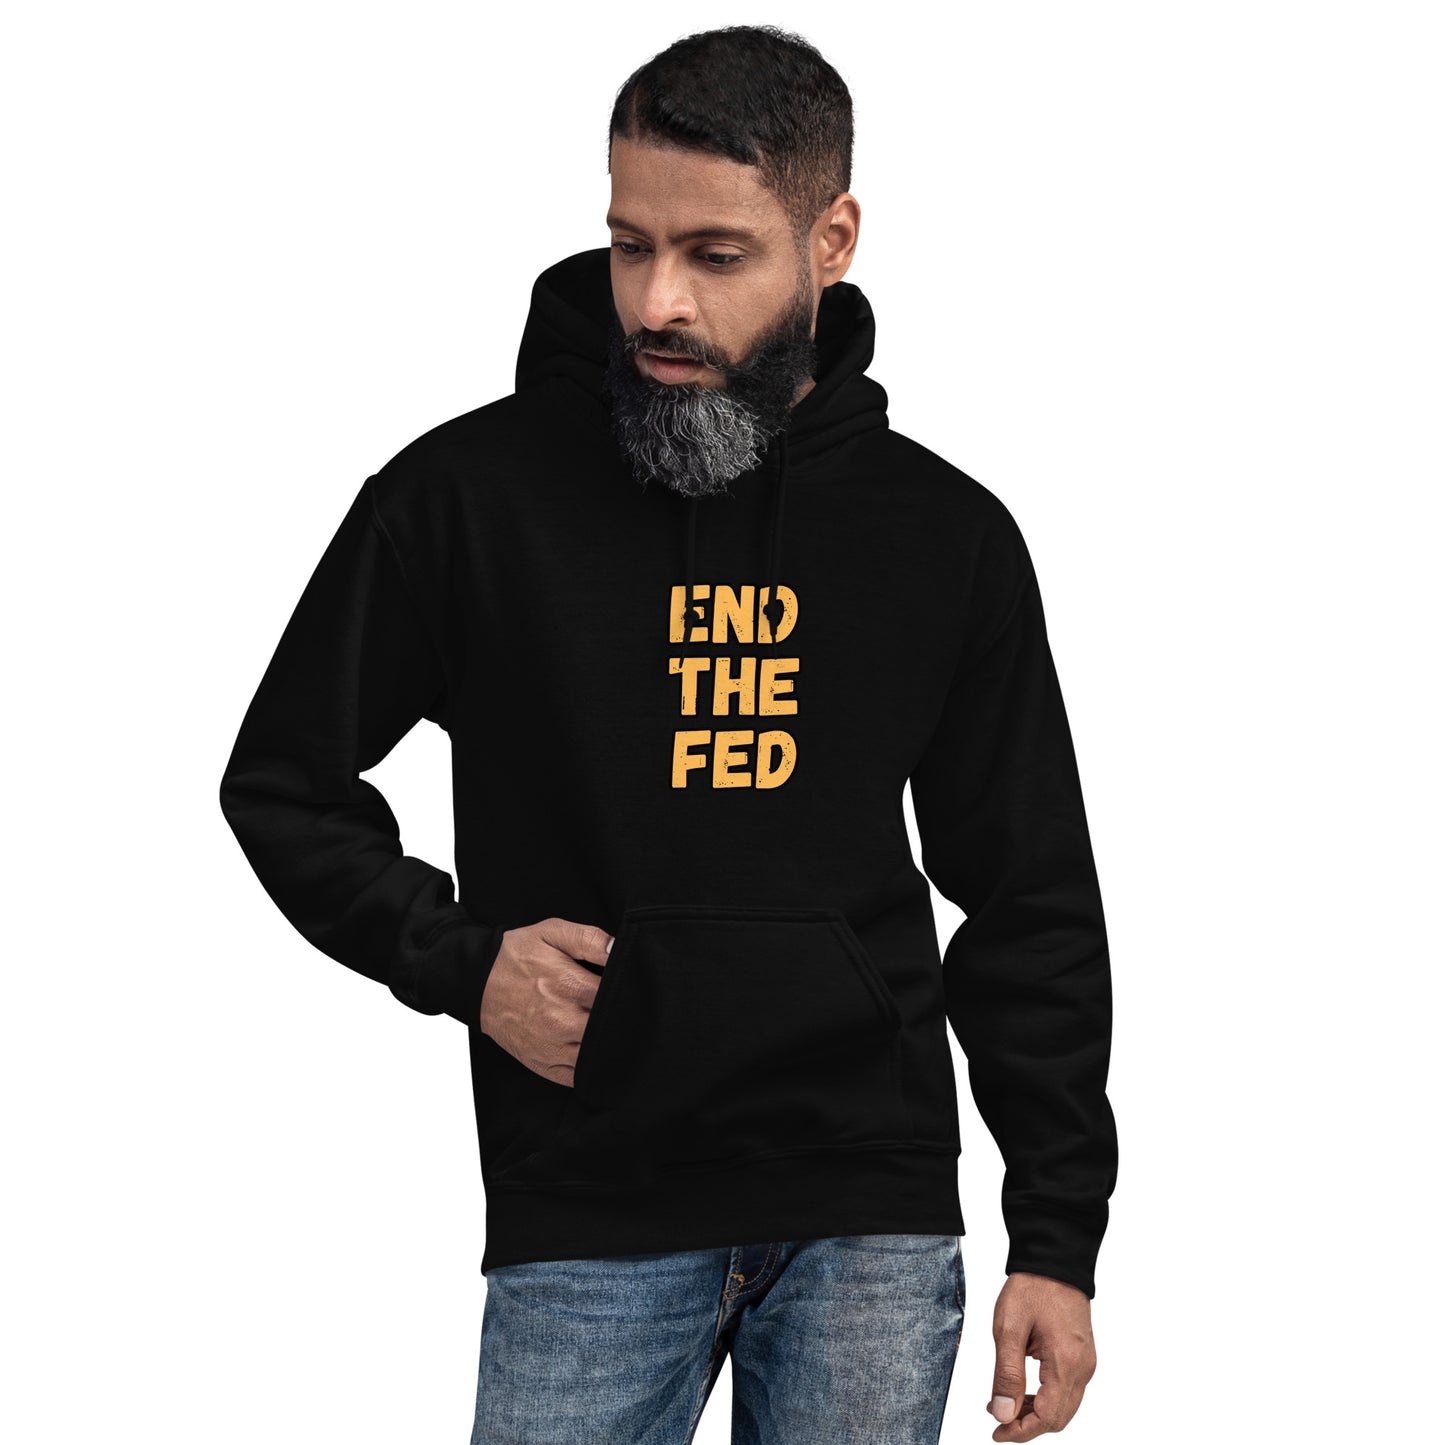 Make a Statement with our 'End the Fed' Unisex Hoodie